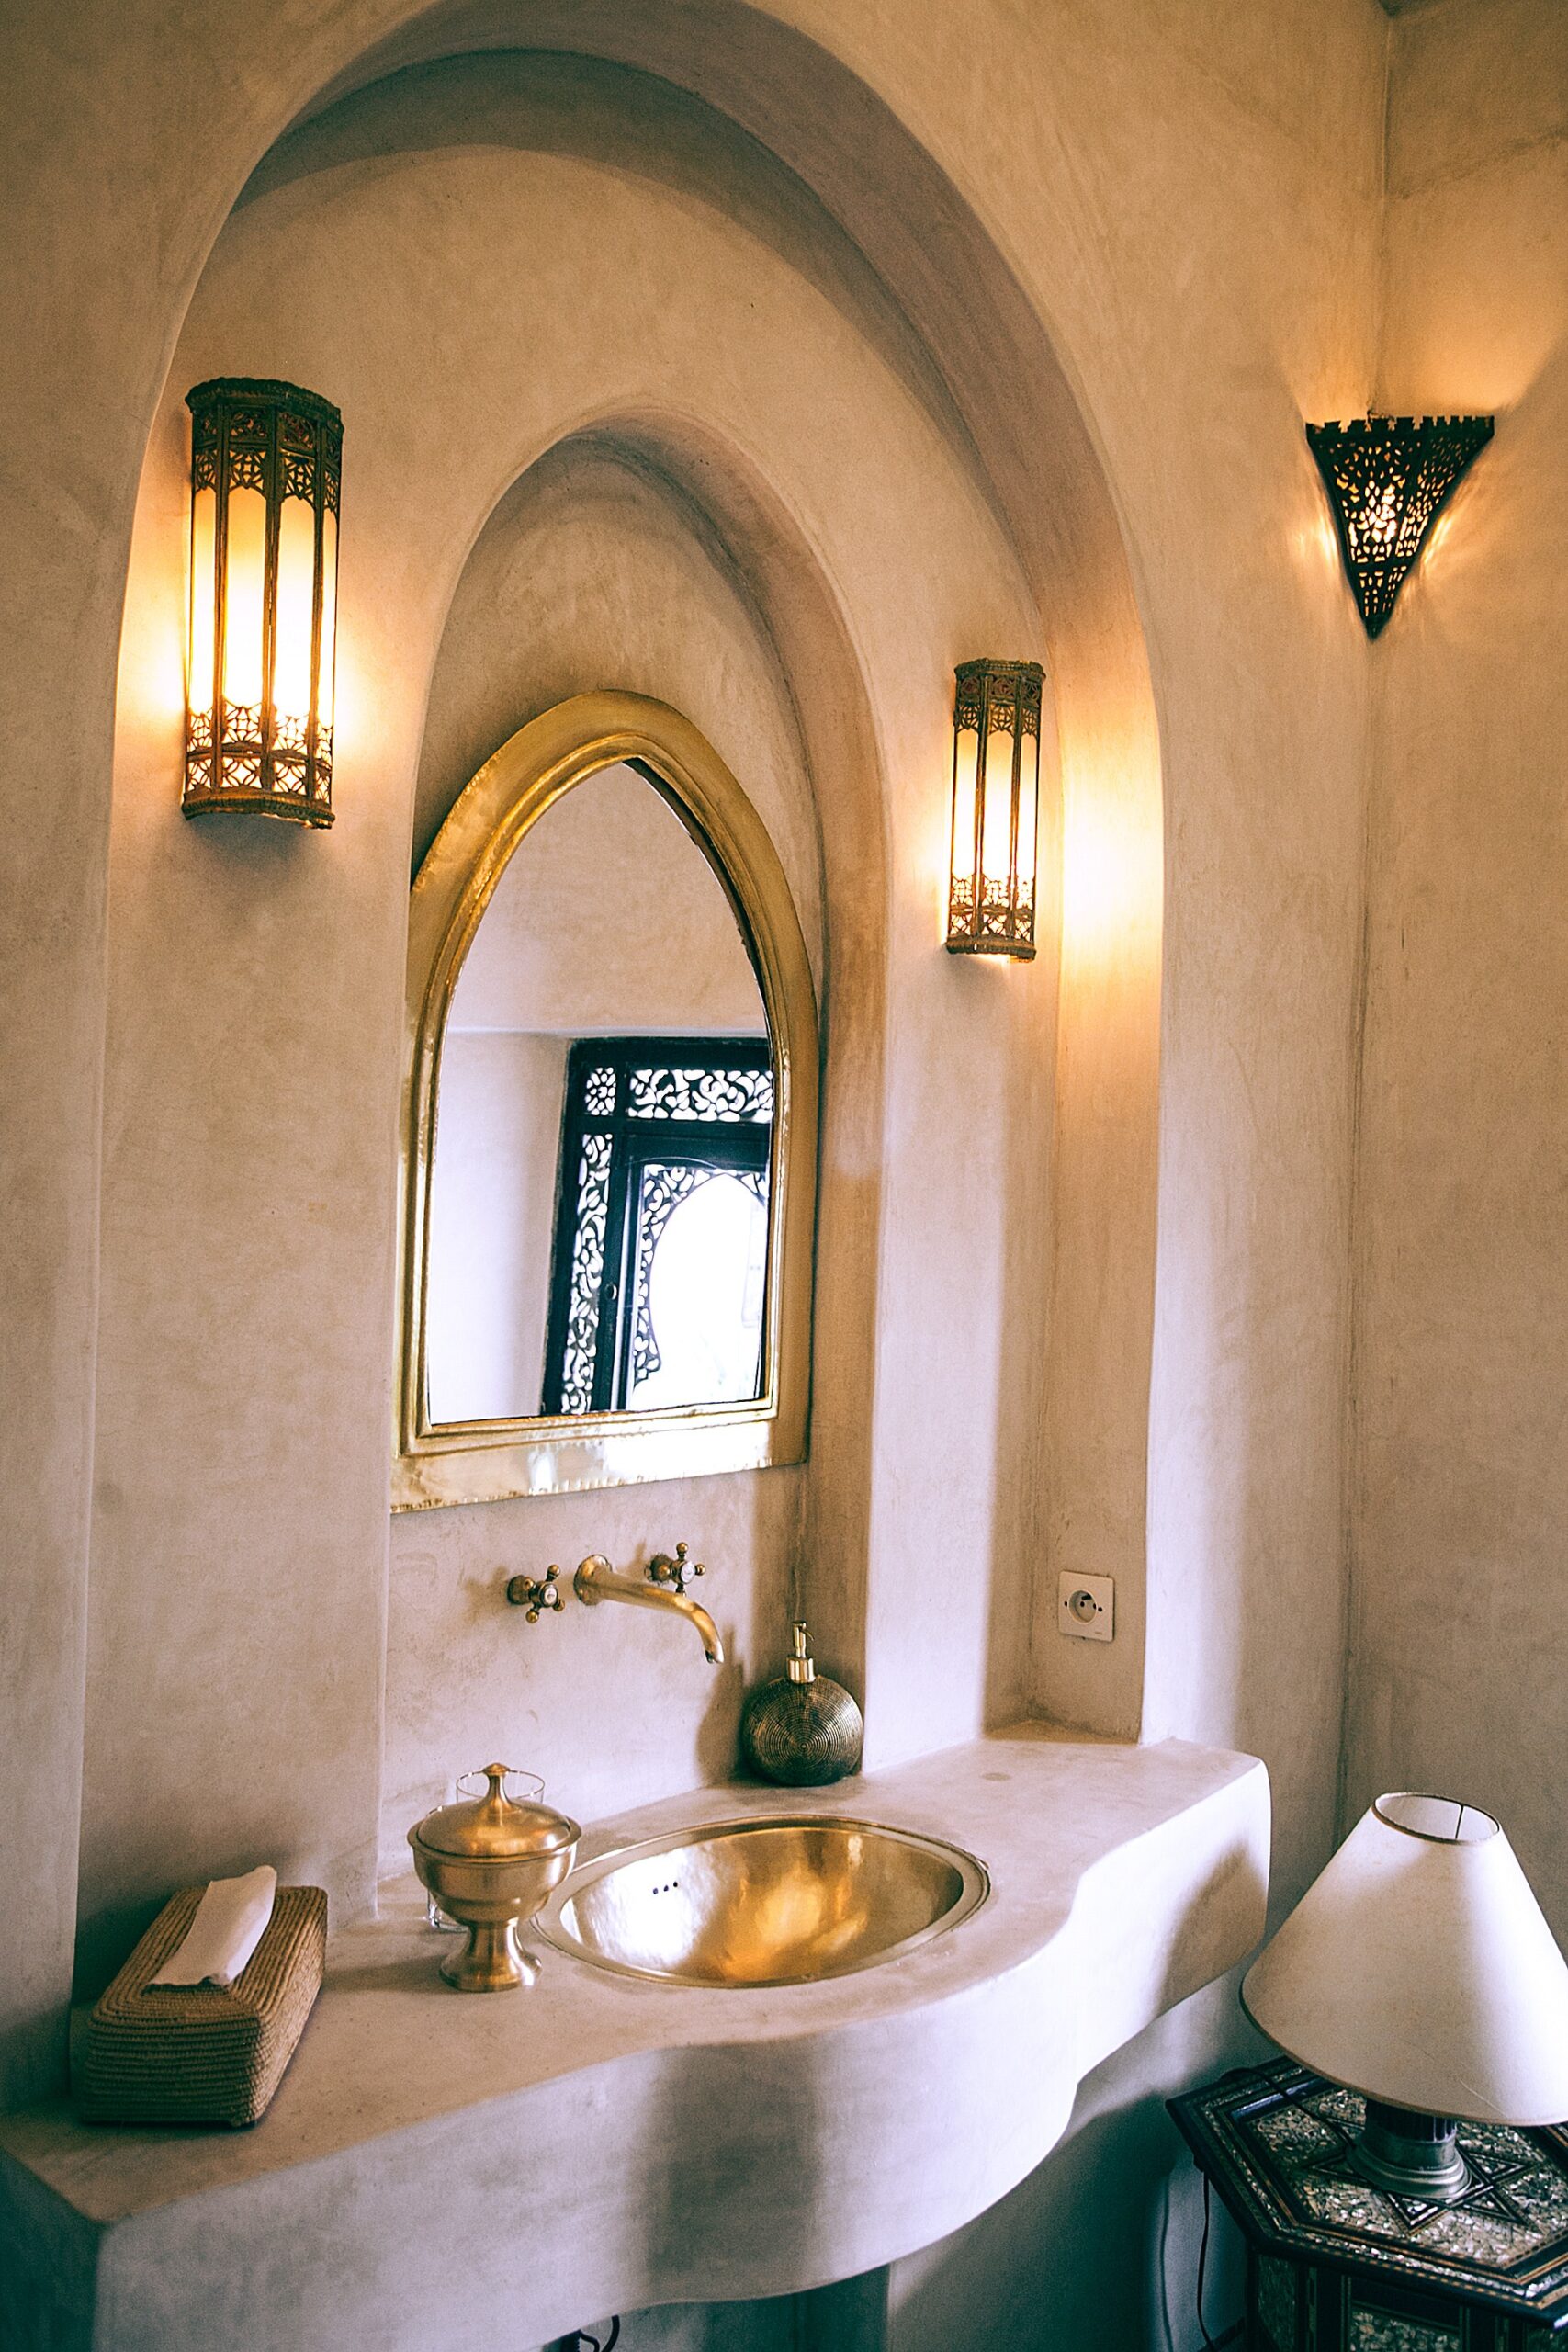 Transform Your Bathroom with These Creative Lighting Ideas